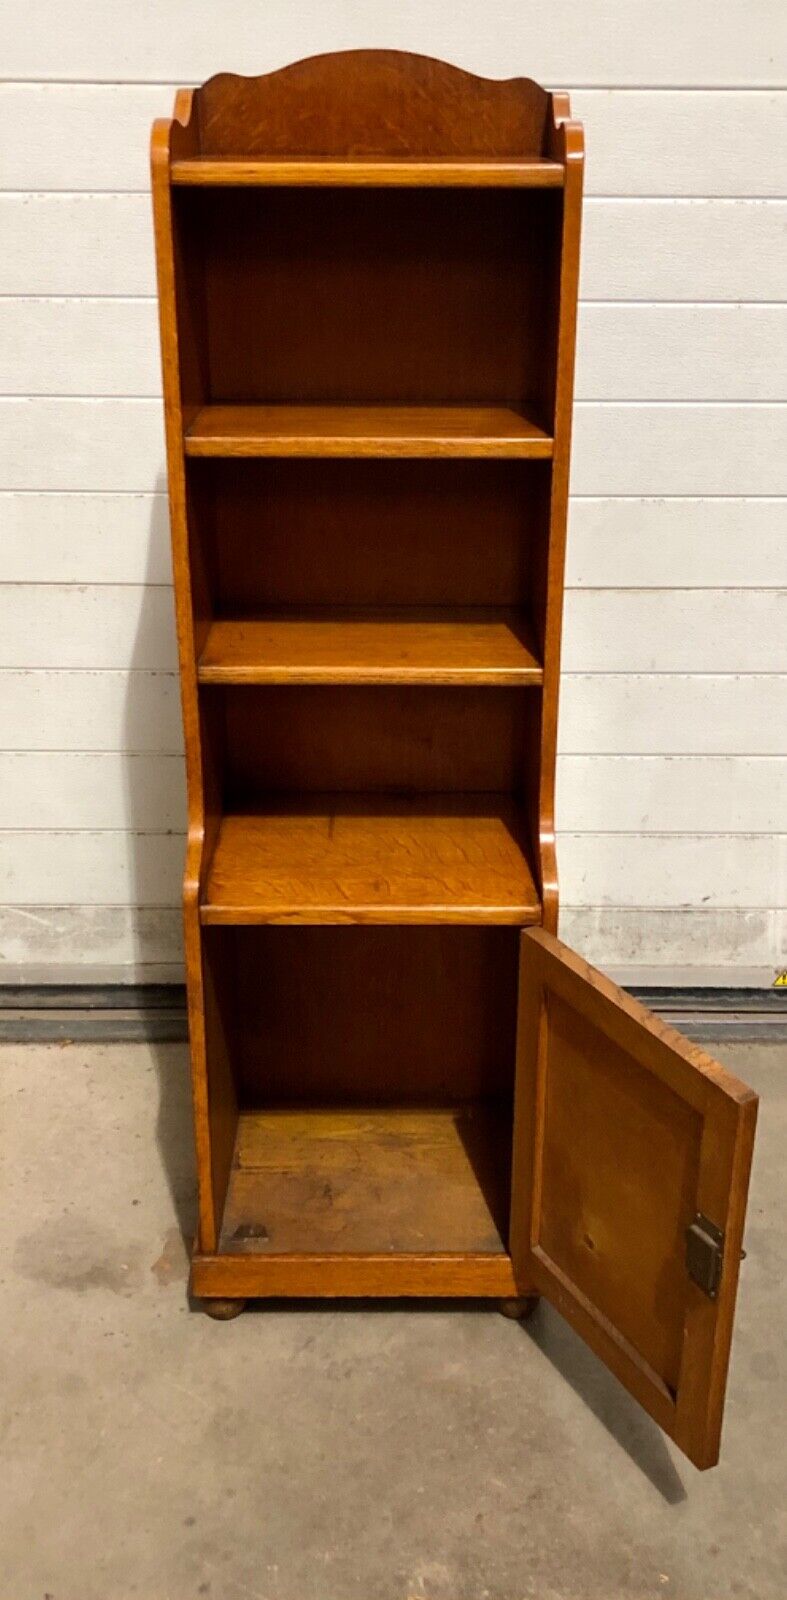 000748....Handsome Vintage Bookcase With Cupboard And Shelves( sold )